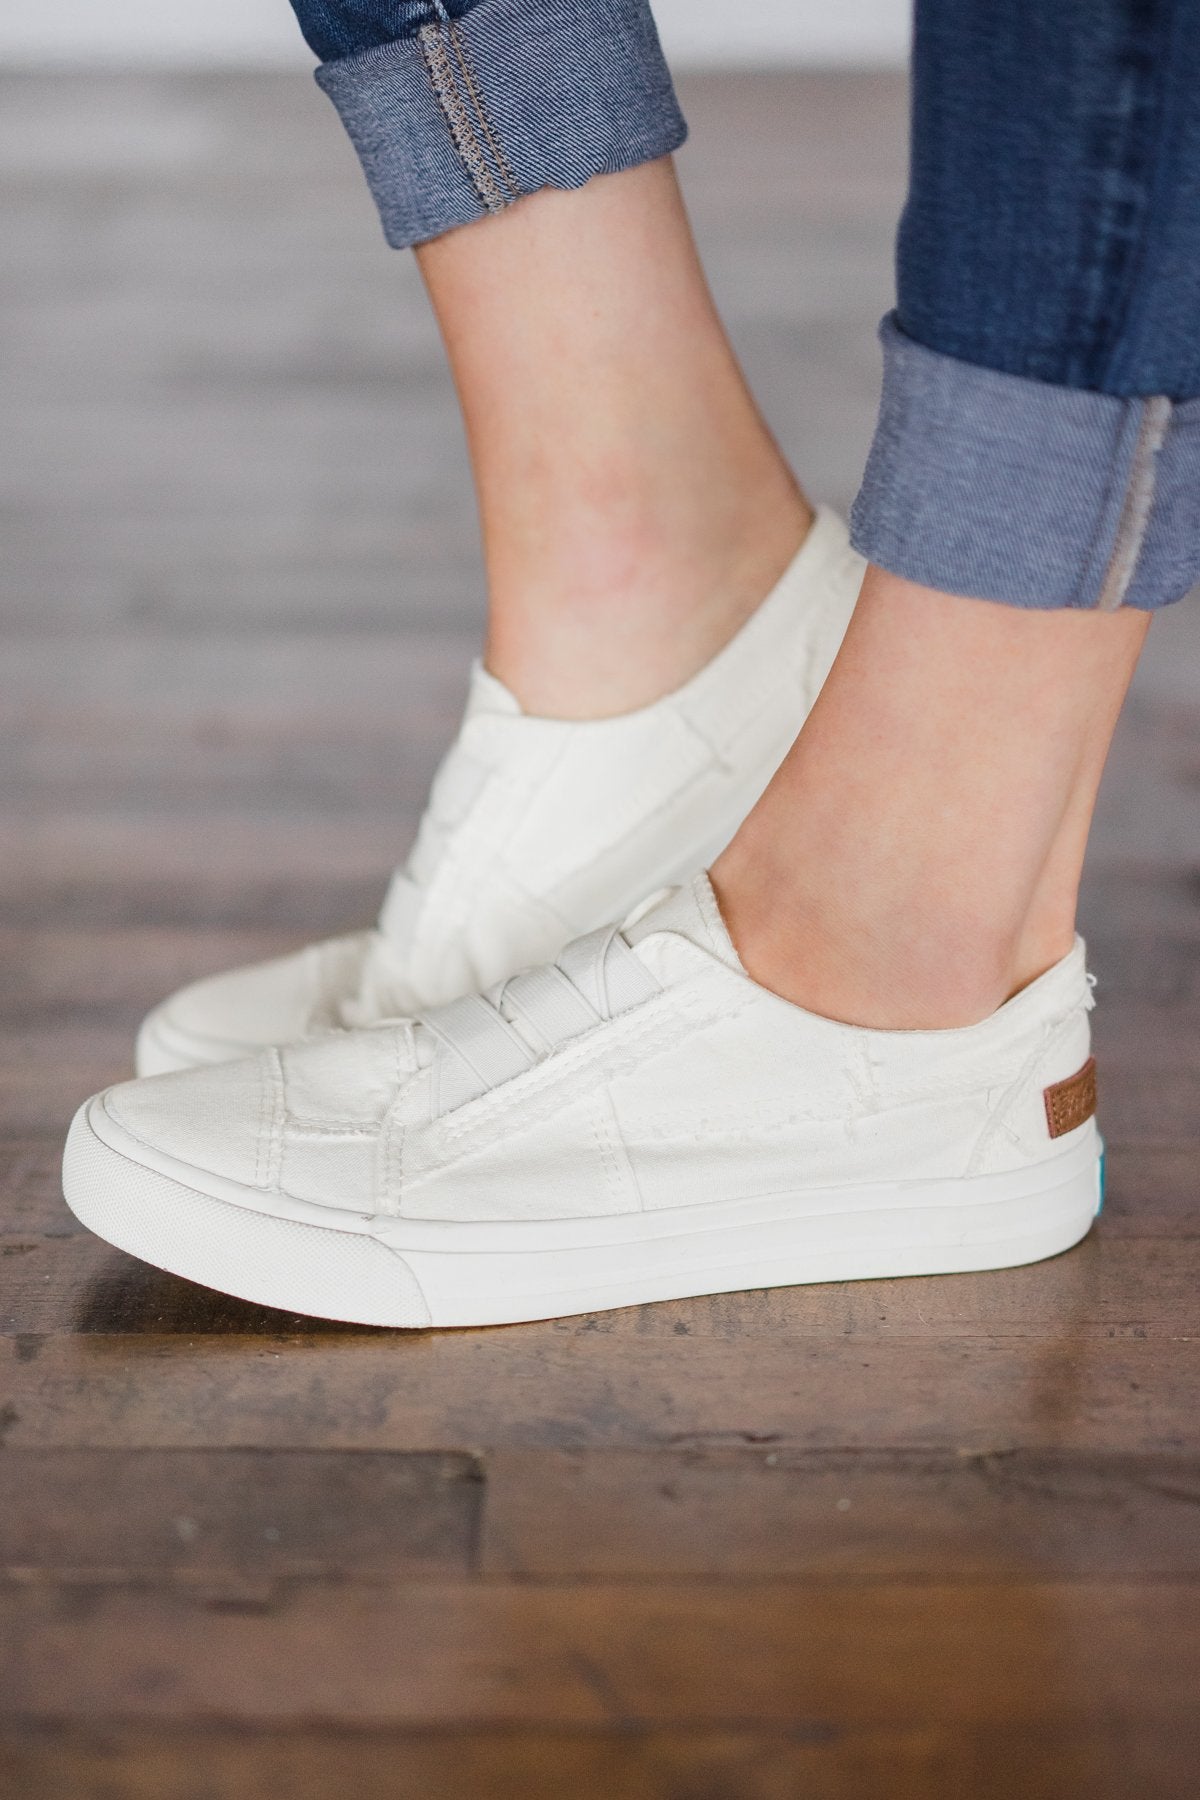 Blowfish - Marley White Sneakers – The 